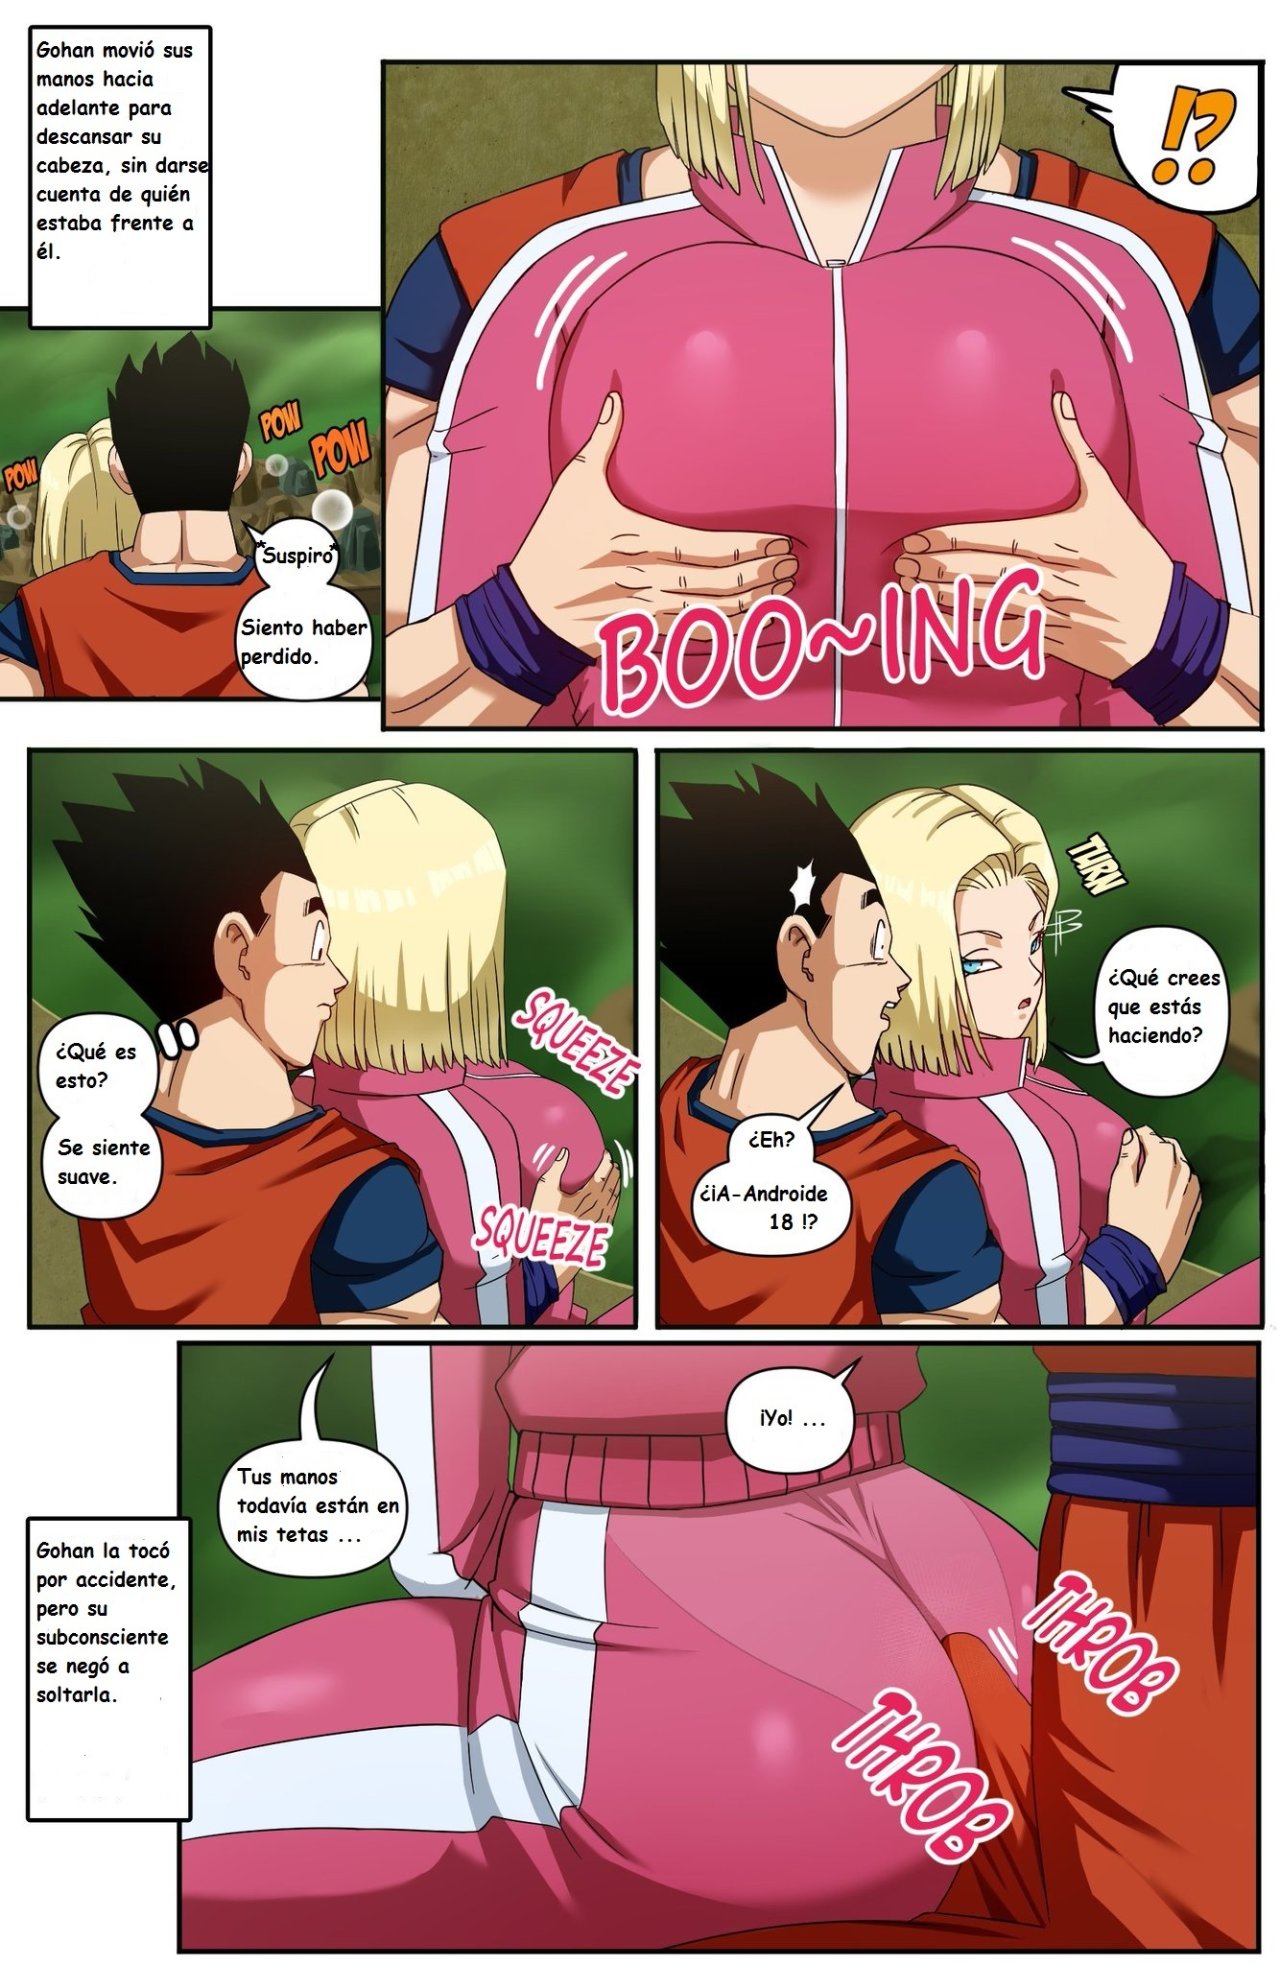 ANDROID 18 y GOHAN parte 2